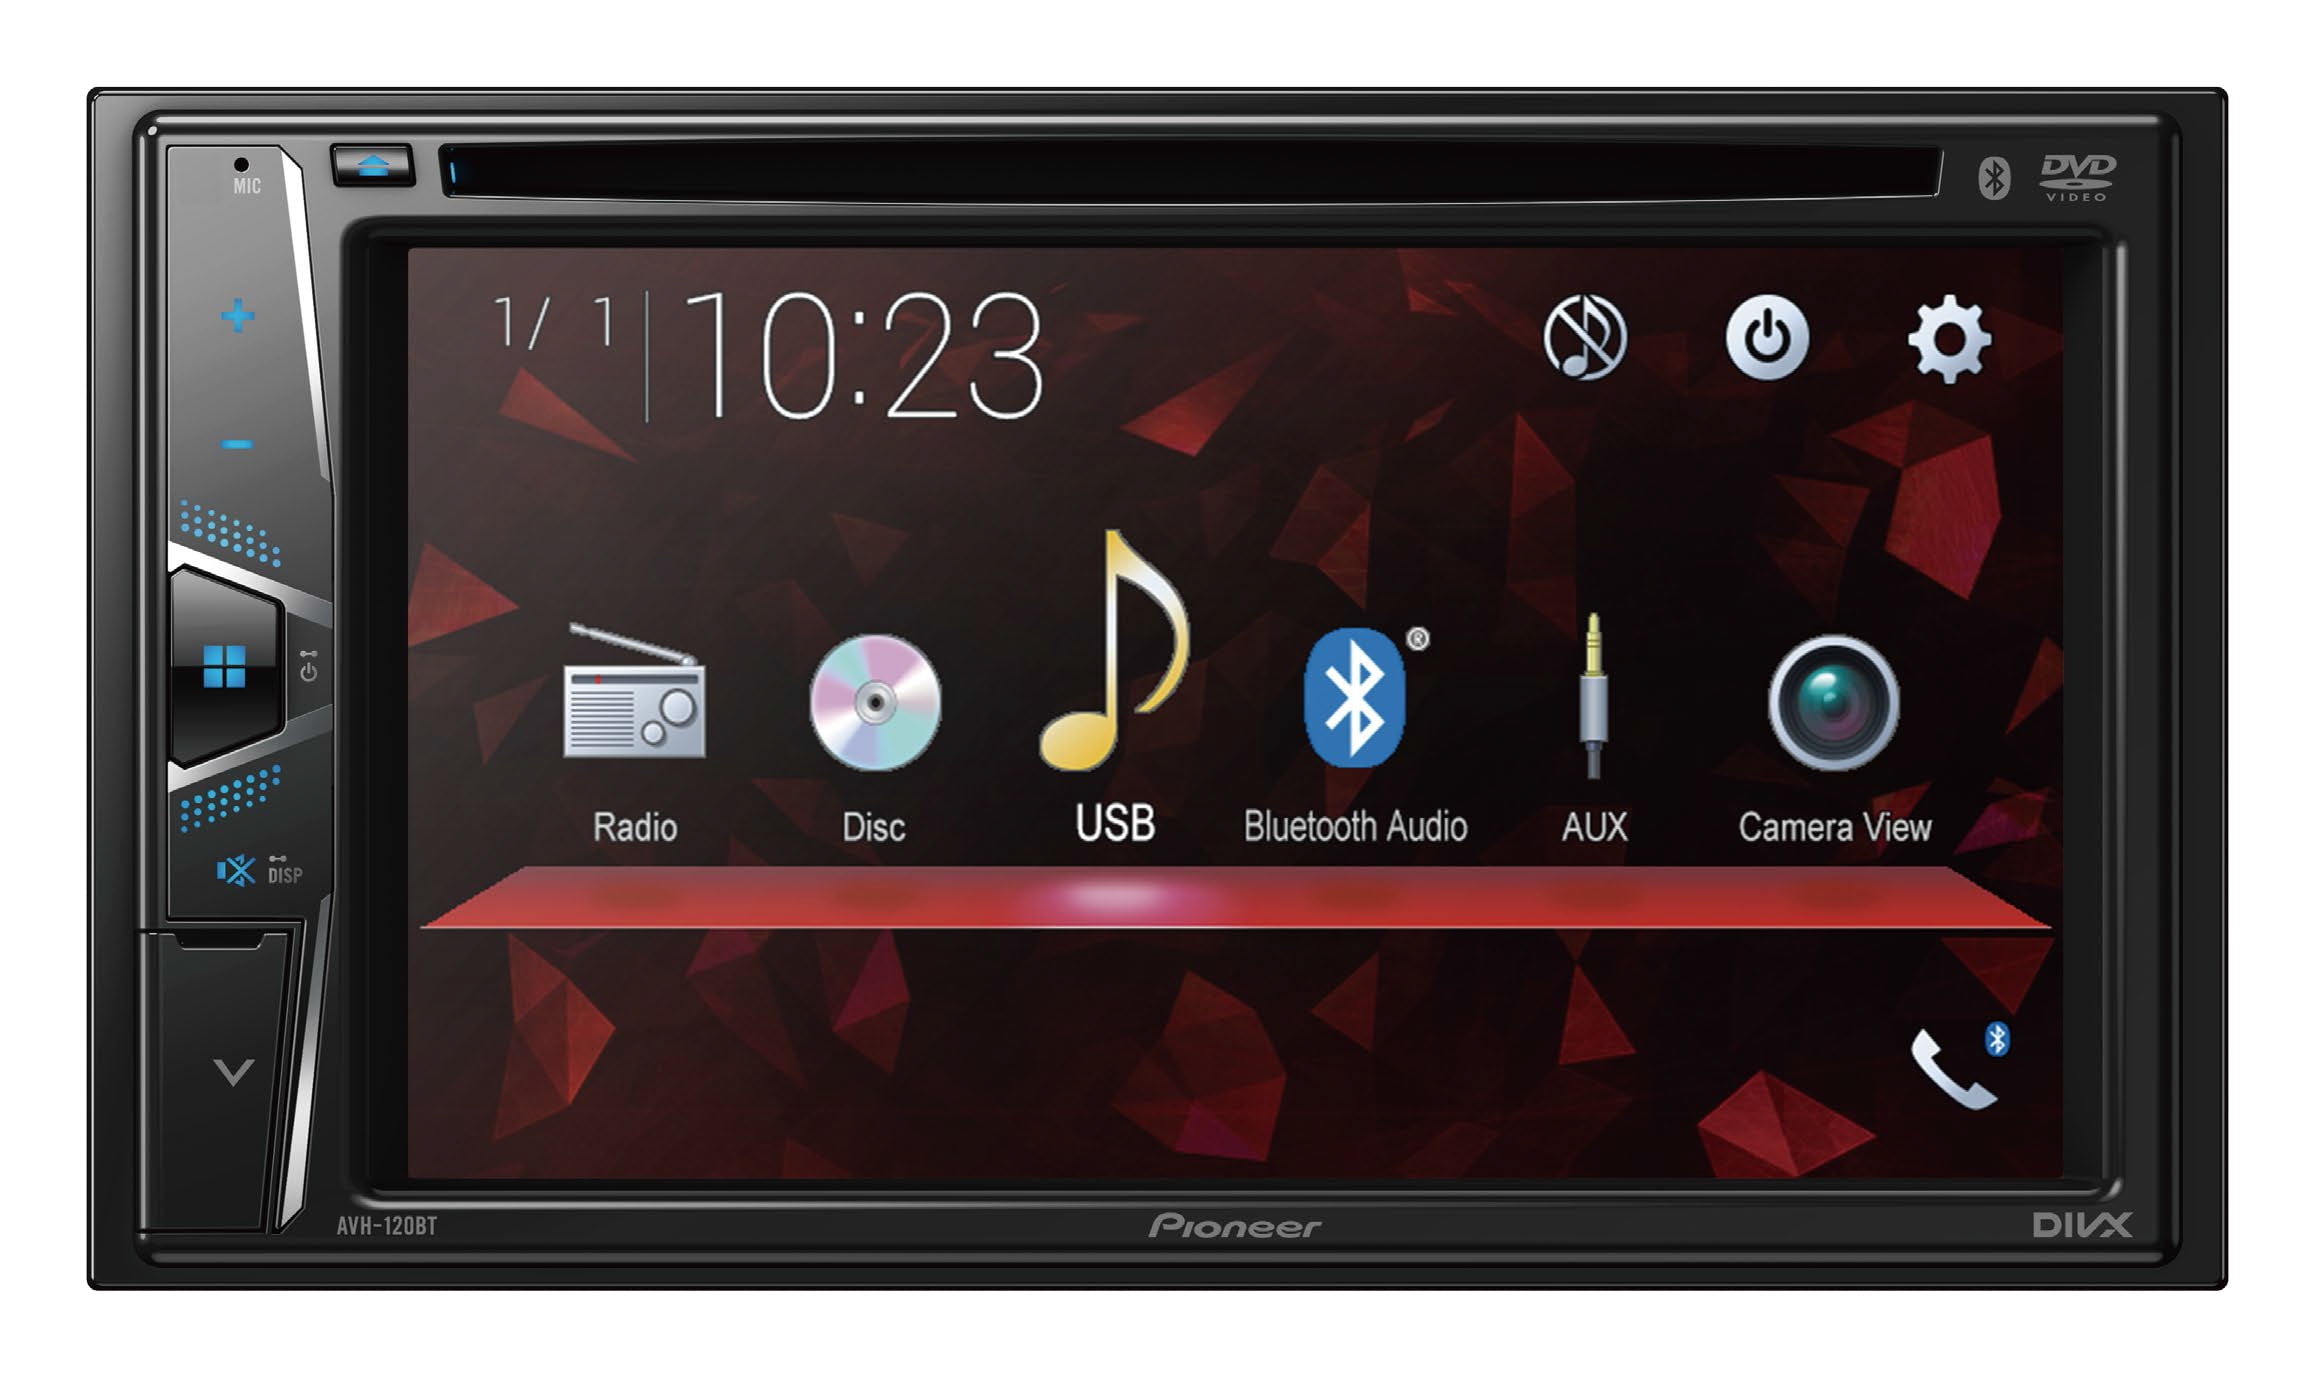 Pioneer AVH-120BT Multimedia Receiver with 6.2 Inch WVGA Touchscreen Display and Built-in Bluetooth for Hands-free Calling and Audio Playback | Double DIN | DVD / MP3 / CD Player